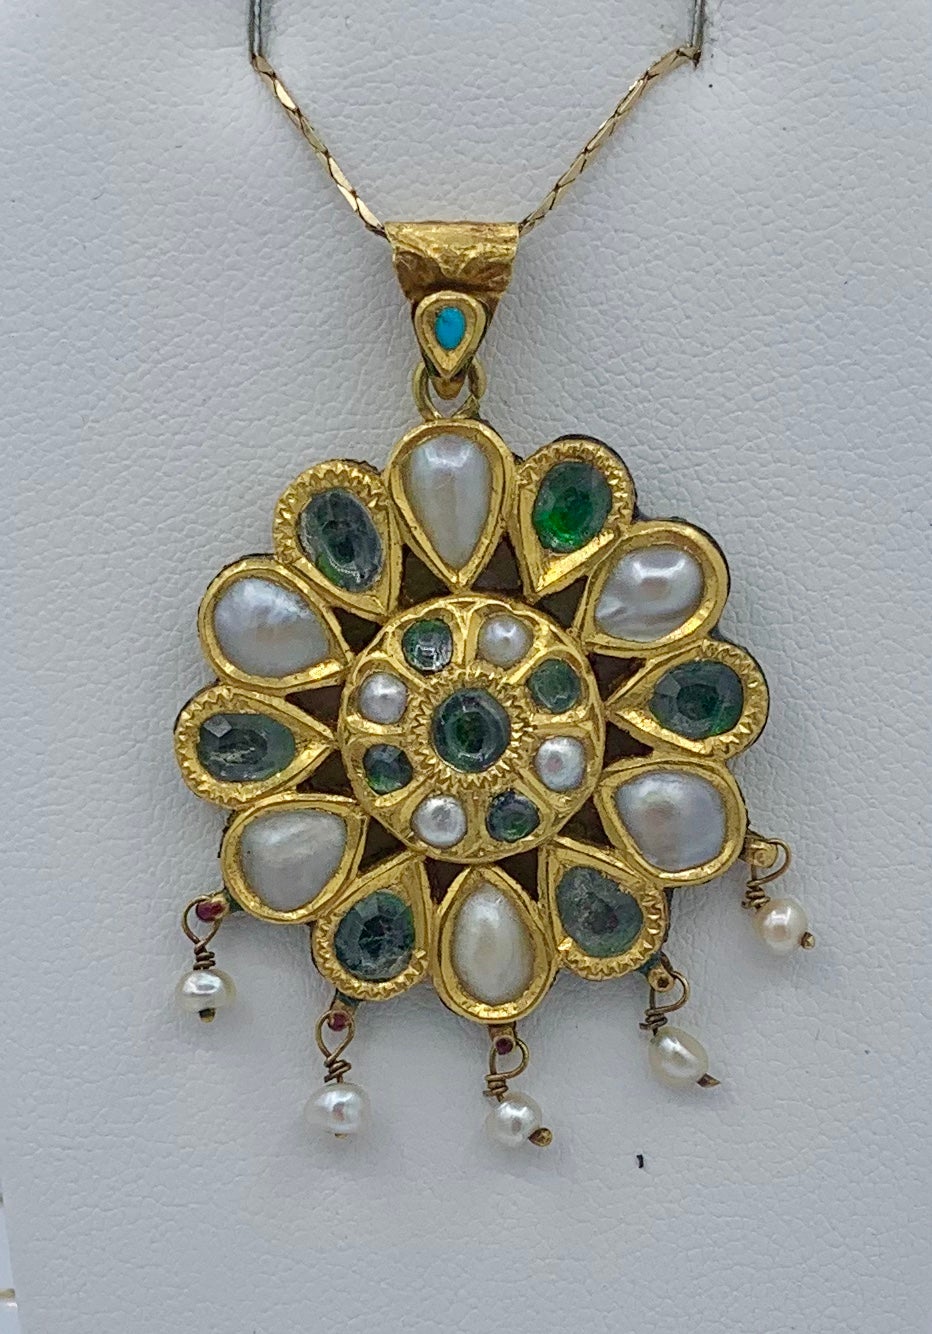 This is a wonderful antique Indian Mughal Jeweled Pendant in 22 Karat Gold set with gorgeous Topaz gems with Pearls in a classic medallion design with exquisite Enamel bird and flower decoration on the reverse.  This is an early antique pendant. 